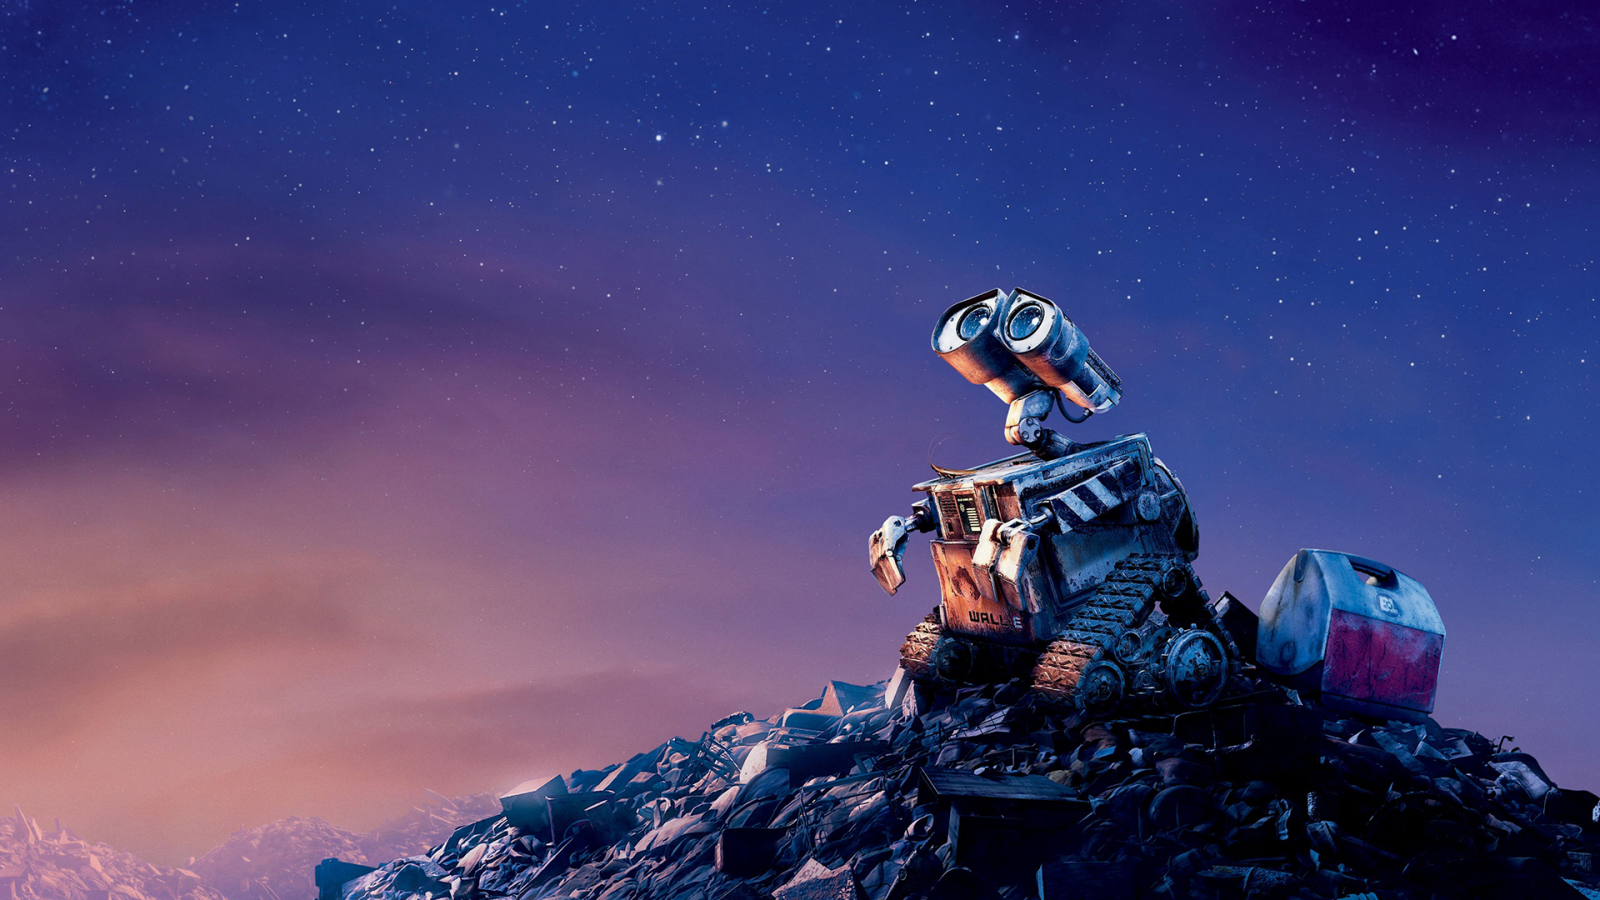 Wall-E for 1600 x 900 HDTV resolution